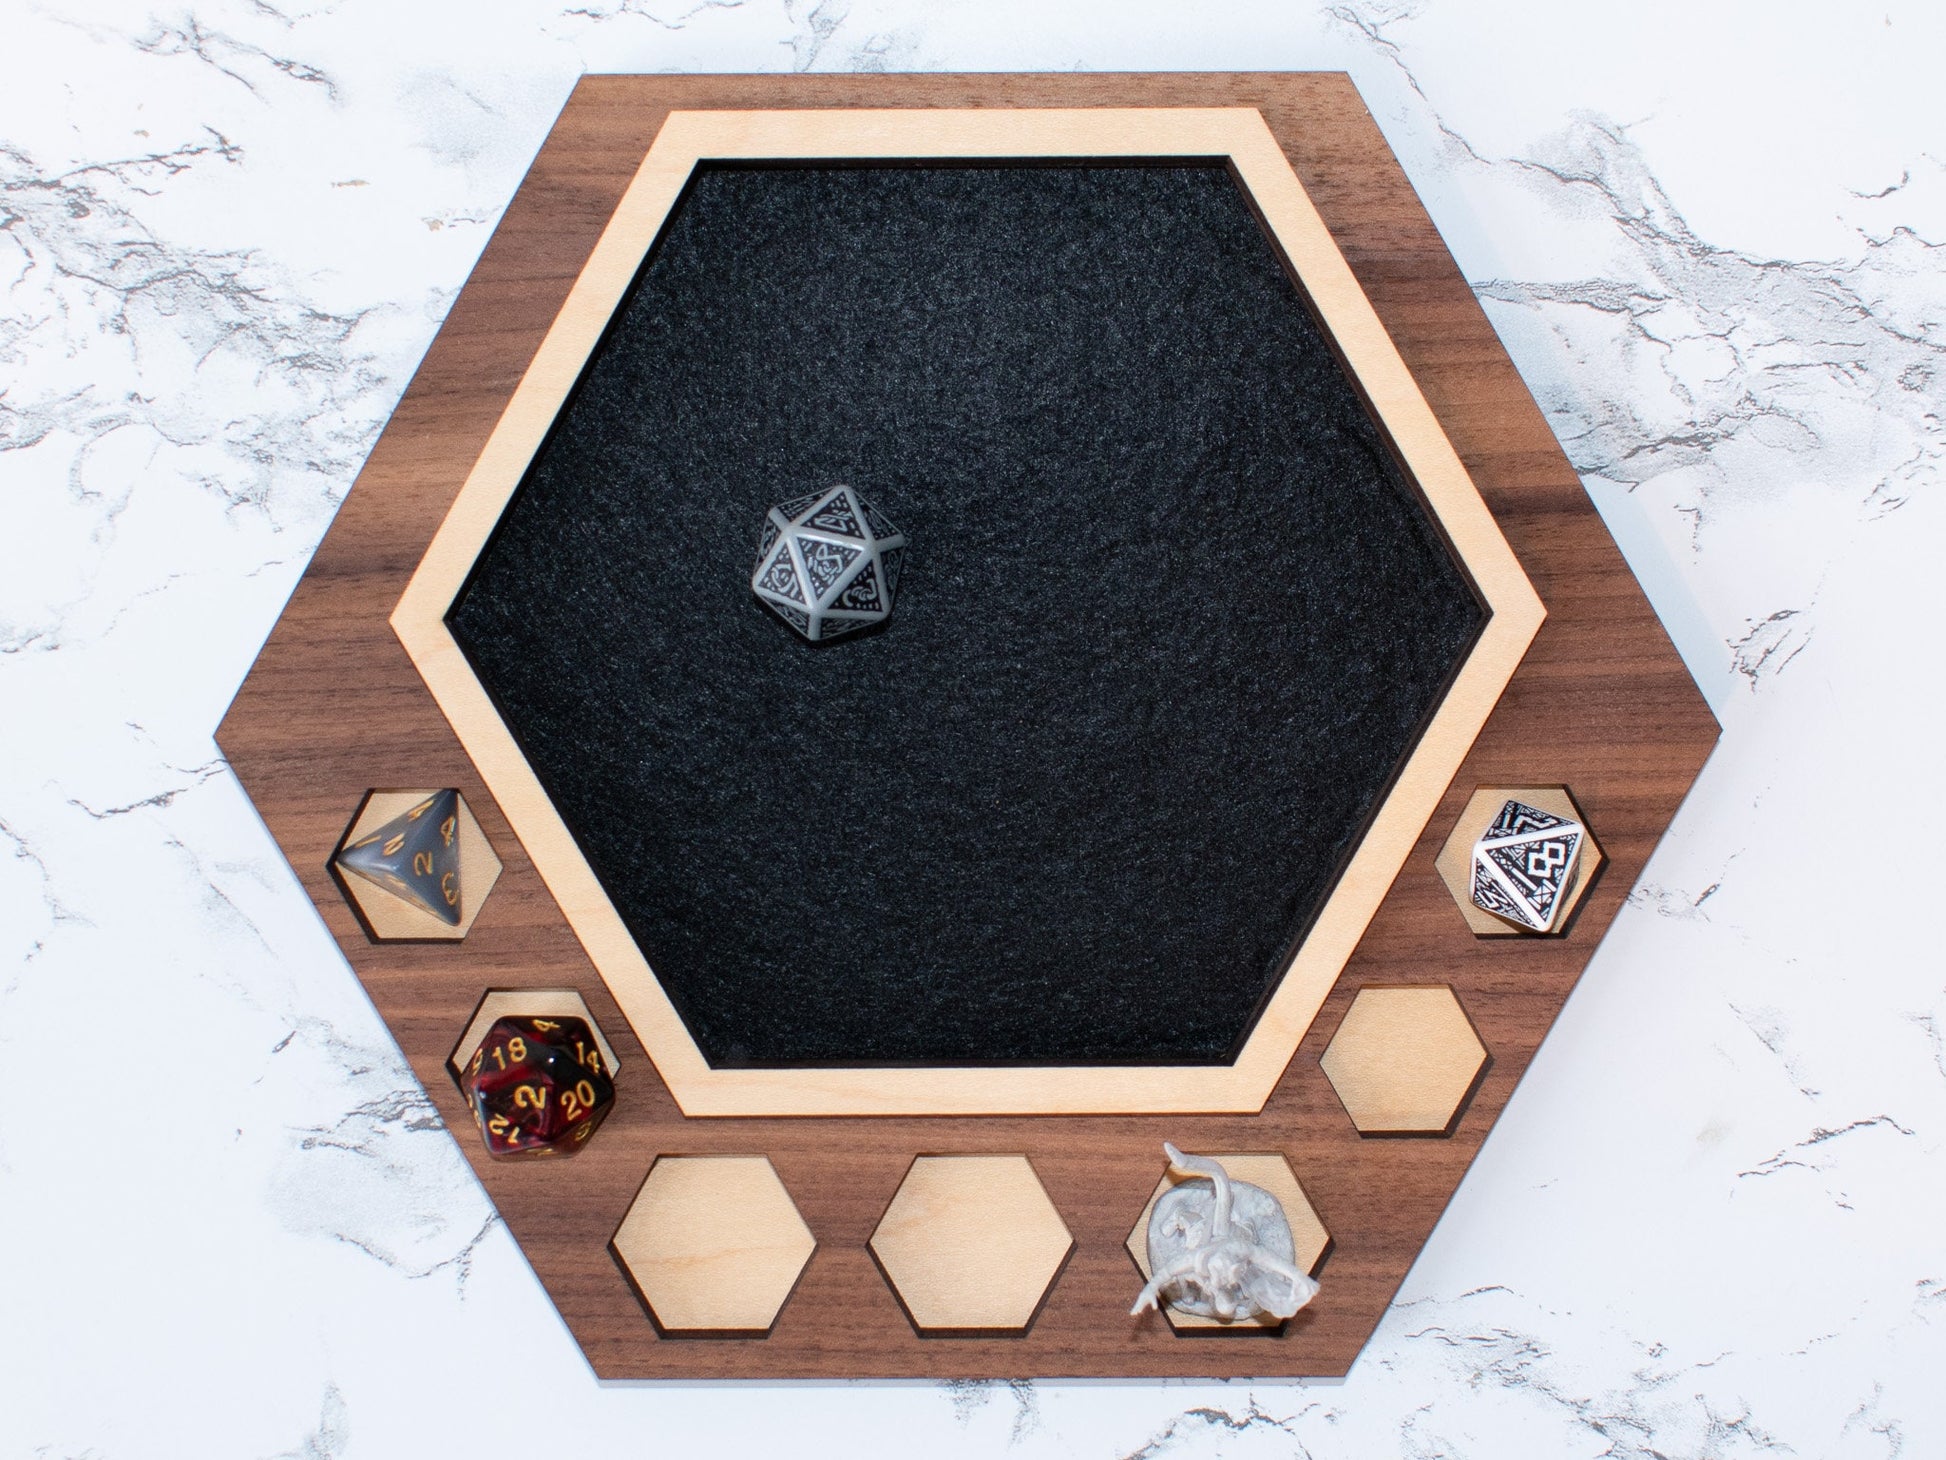 D&D Dice Tray Coaster Combo, Dungeon Master, DM Gift, Dungeons and Dragons Gift, D20 Dice Storage, DnD Accessory